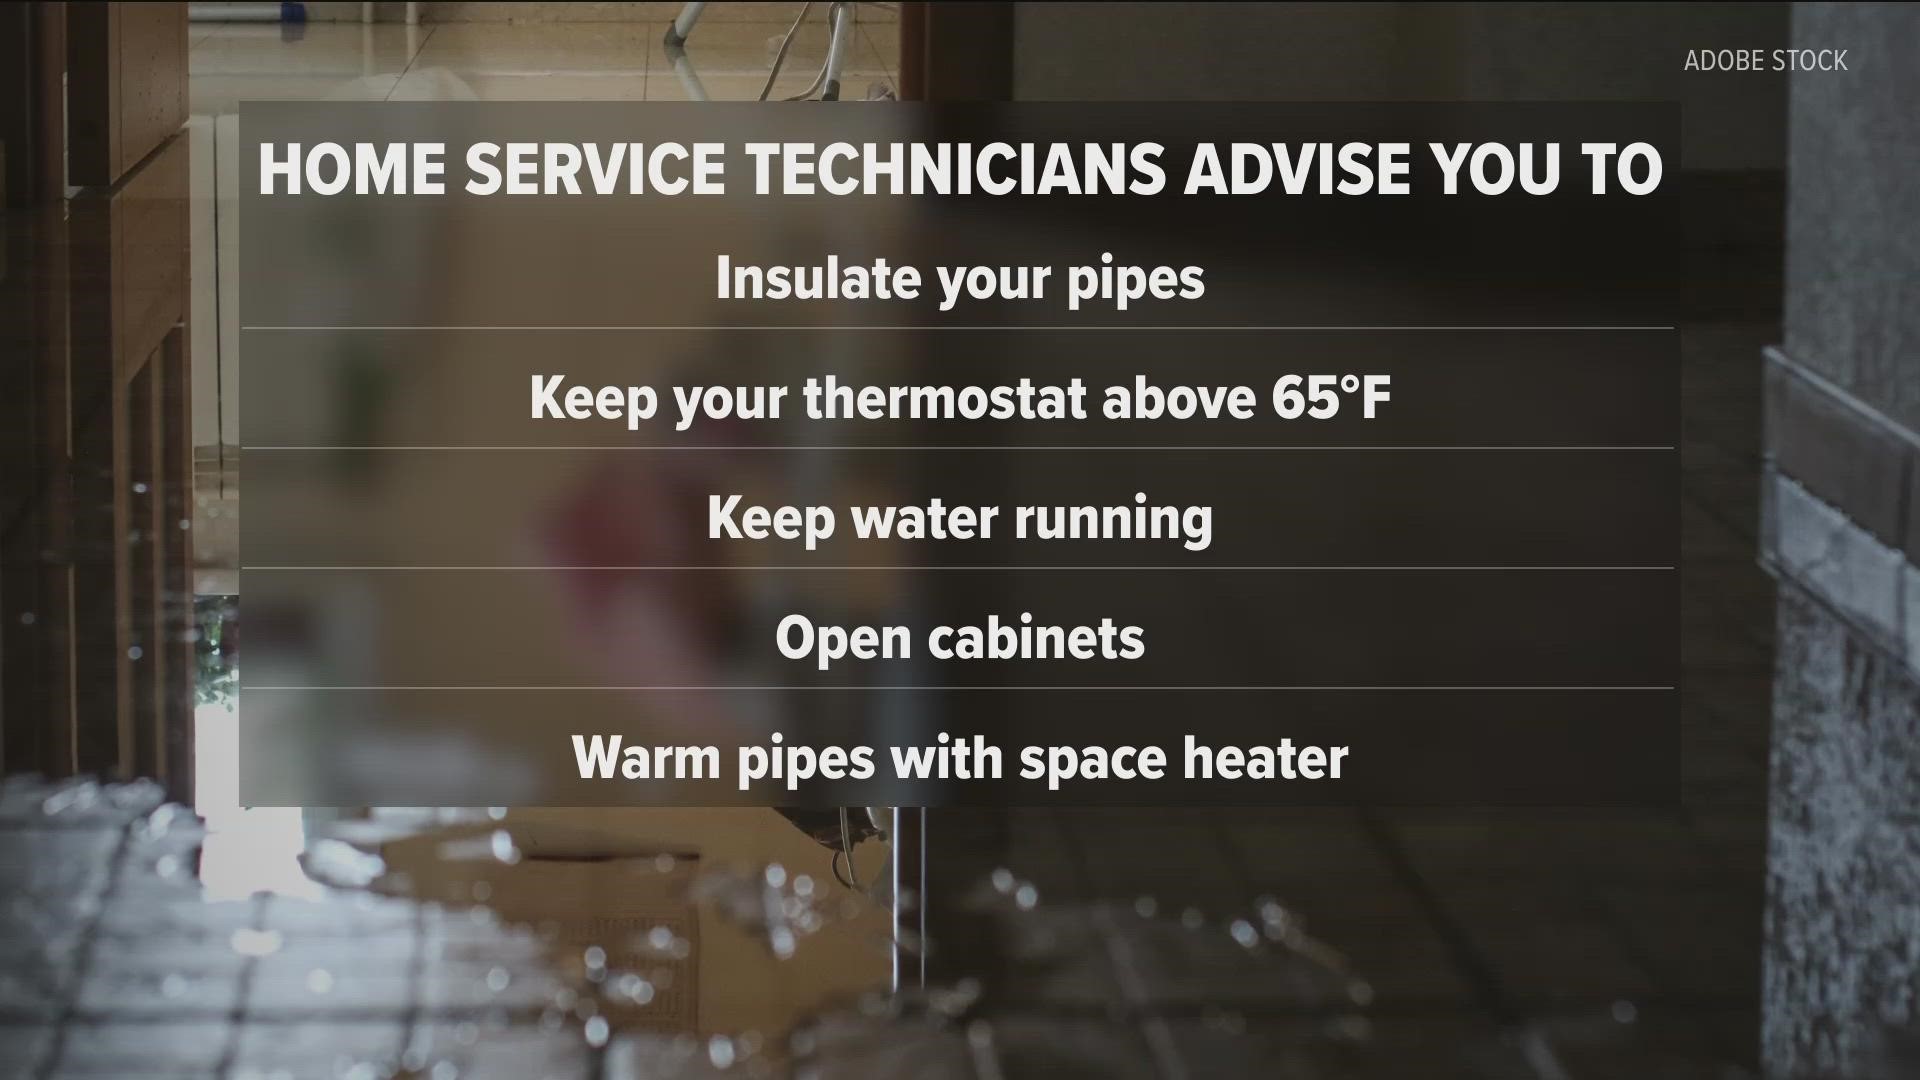 A local home service technician said insulation and heat tape can be used to wrap pipes, among other preventative measures.